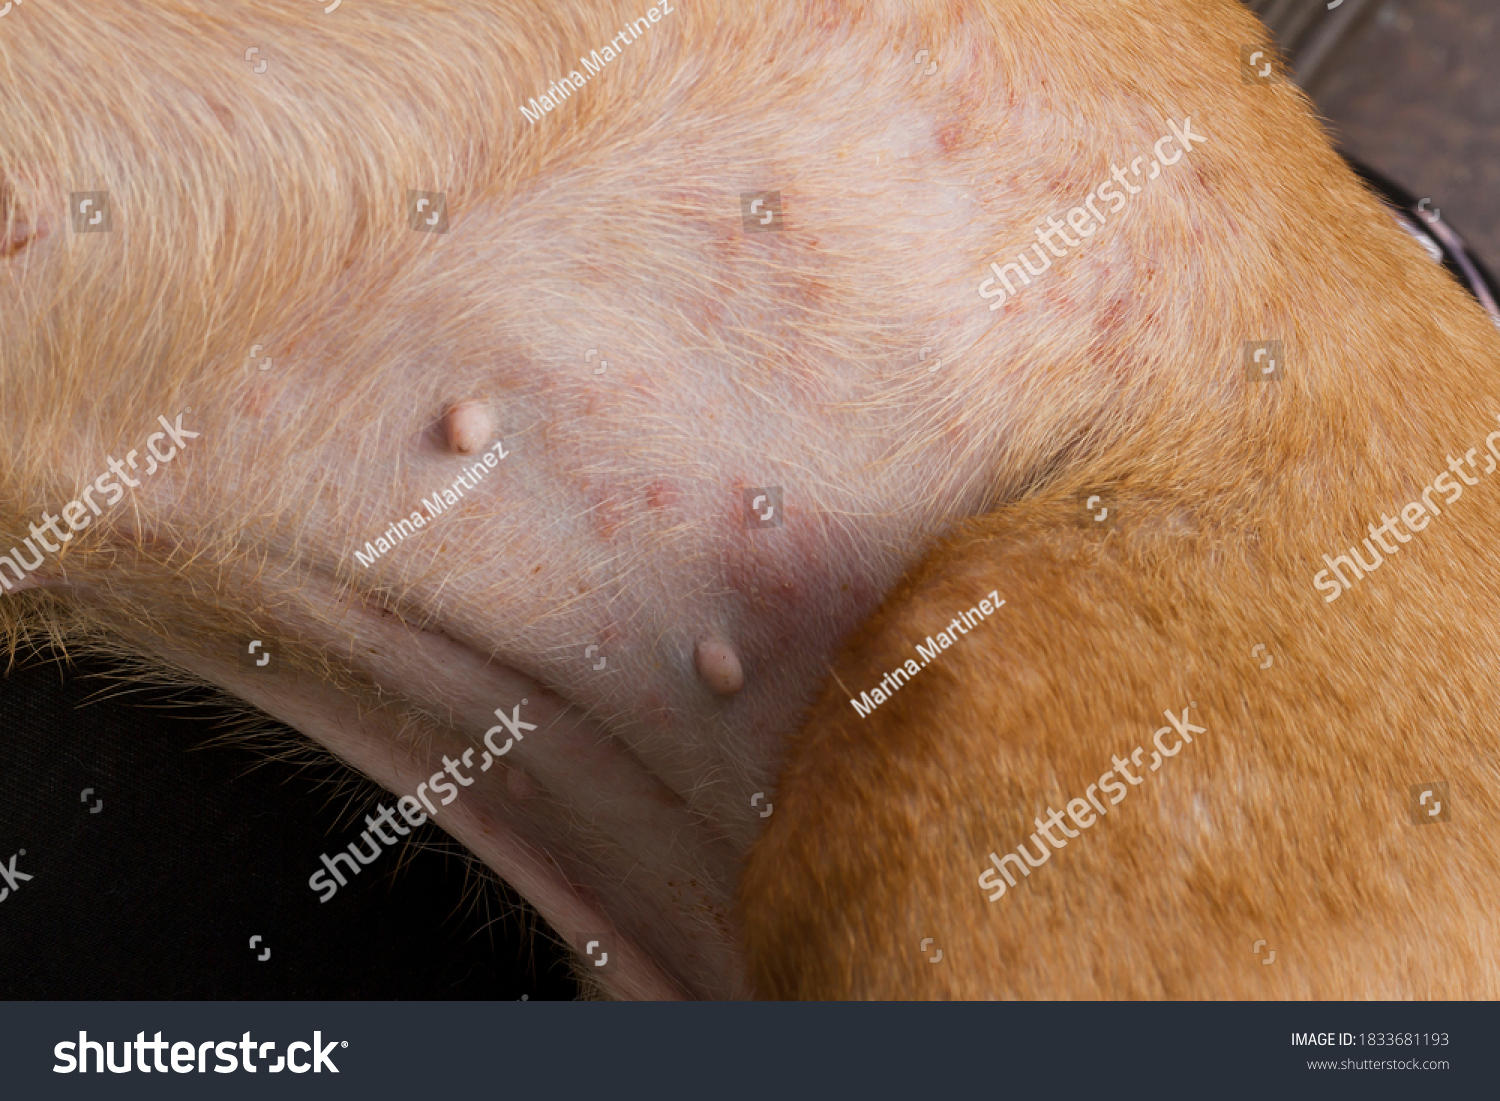 what does a flea bite look like on a dog